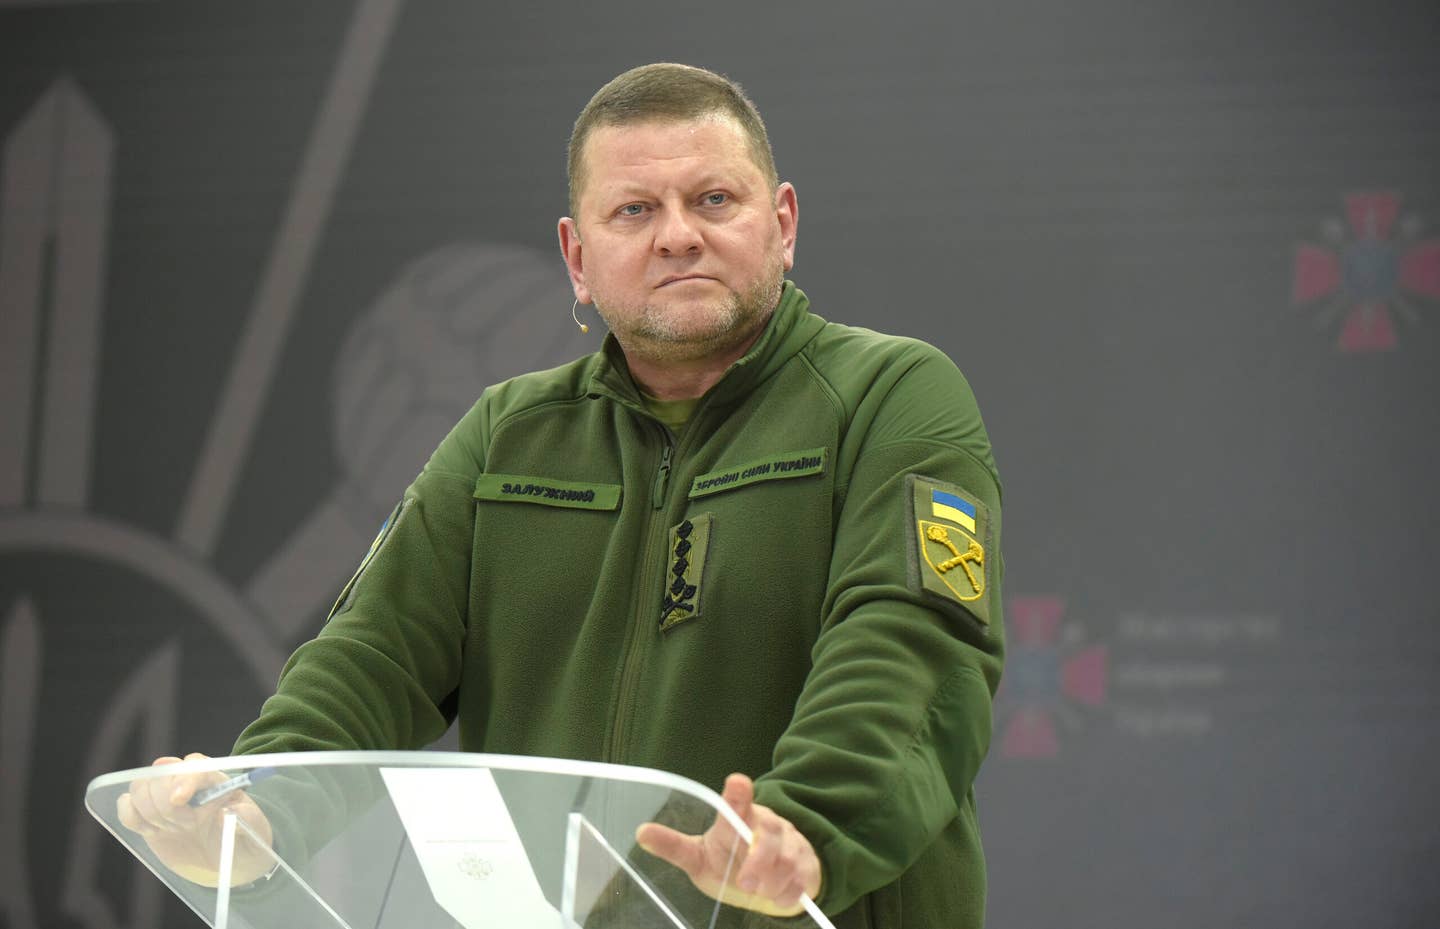 Commander-in-Chief of the Armed Forces of Ukraine, Gen. Valerii Zaluzhnyi holds a press conference in Kyiv. <em>Kaniuka Ruslan / Ukrinform/Future Publishing via Getty Images</em>